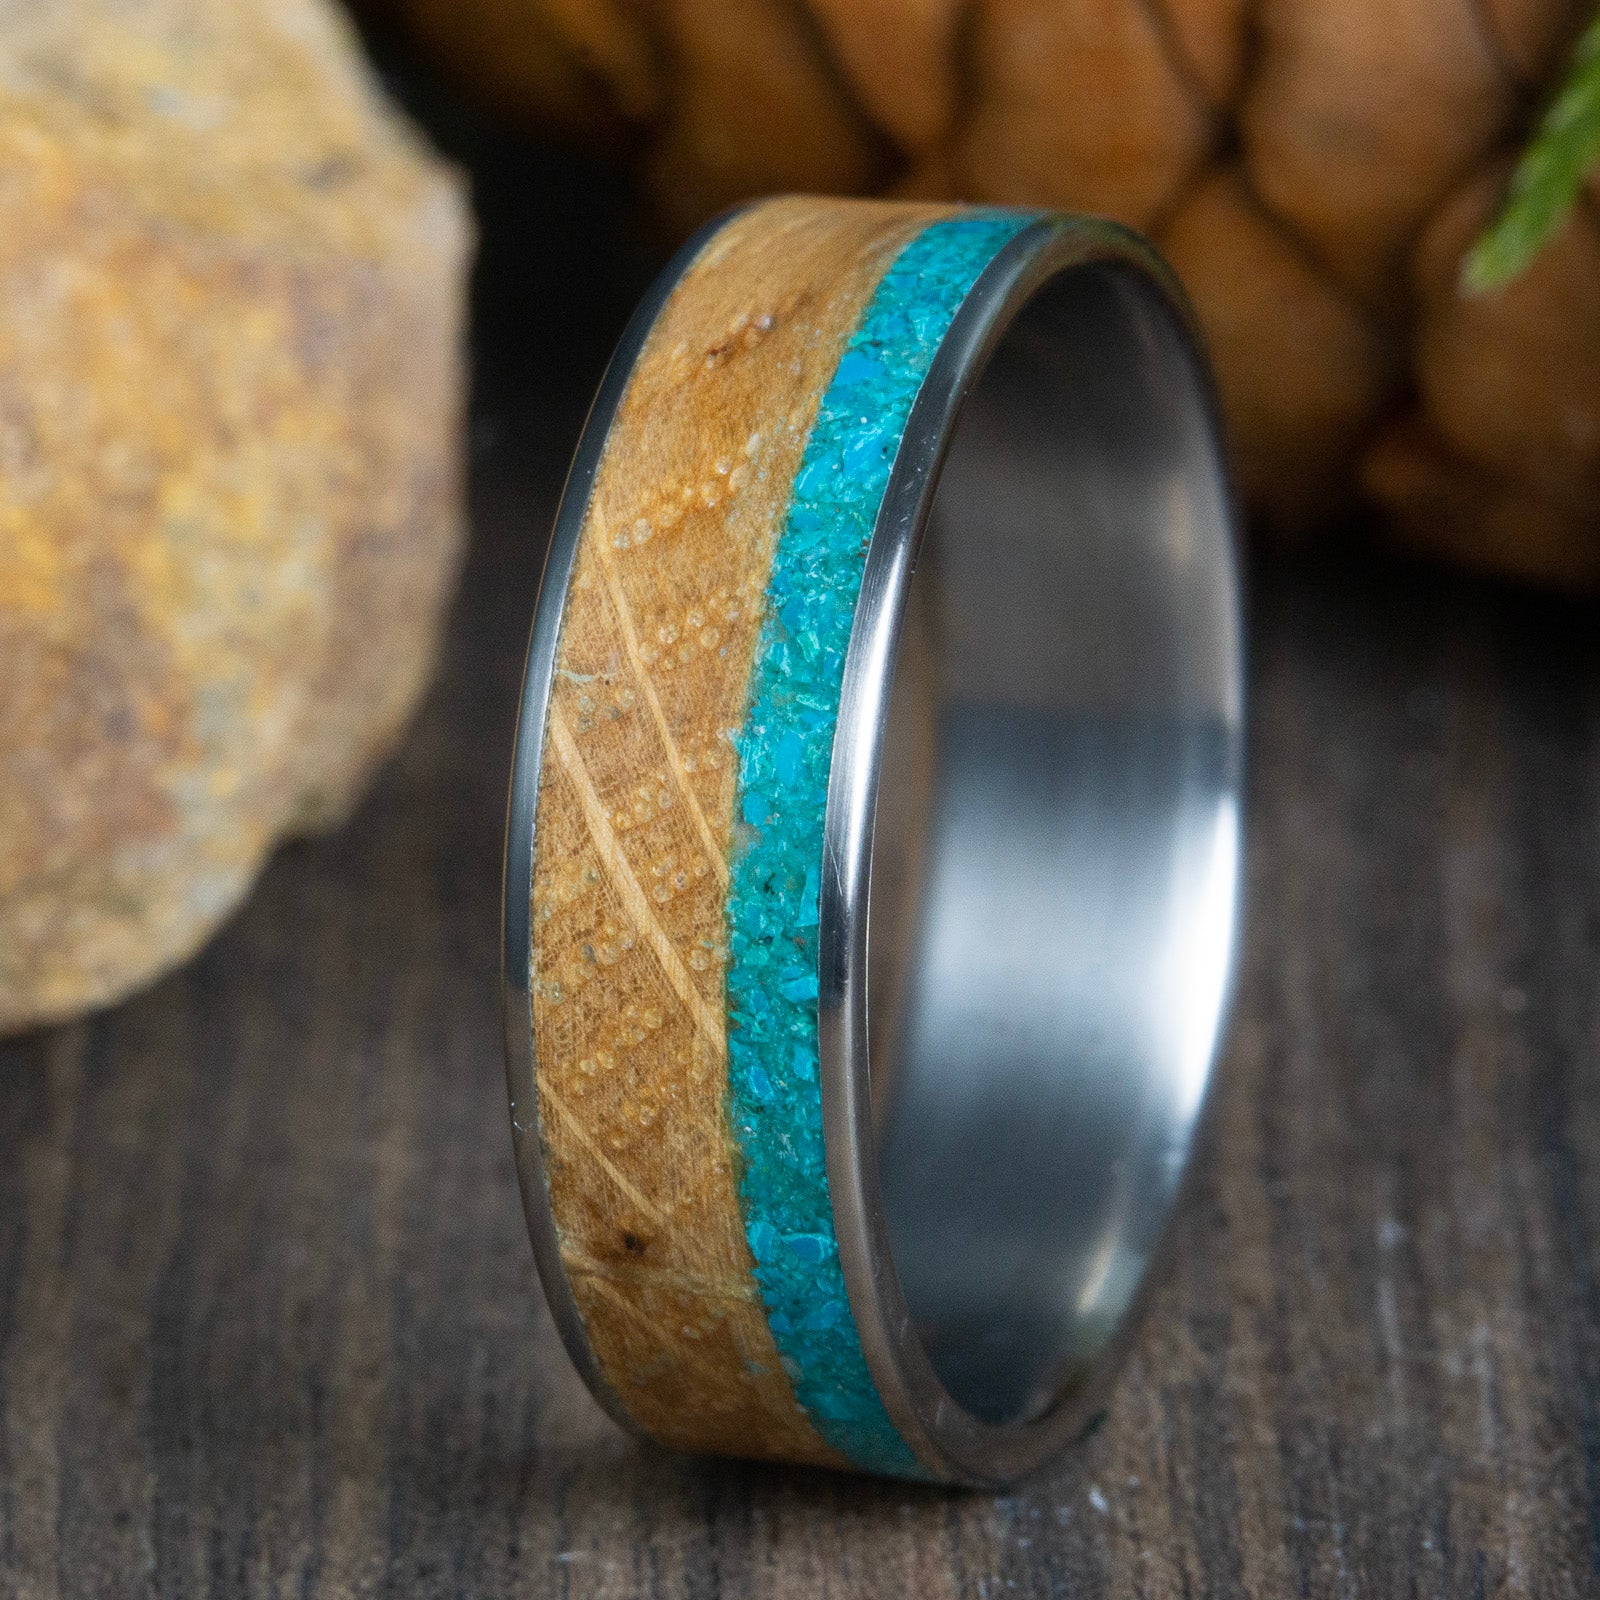 Mens wedding band with Whiskey barrel wood and turquoise